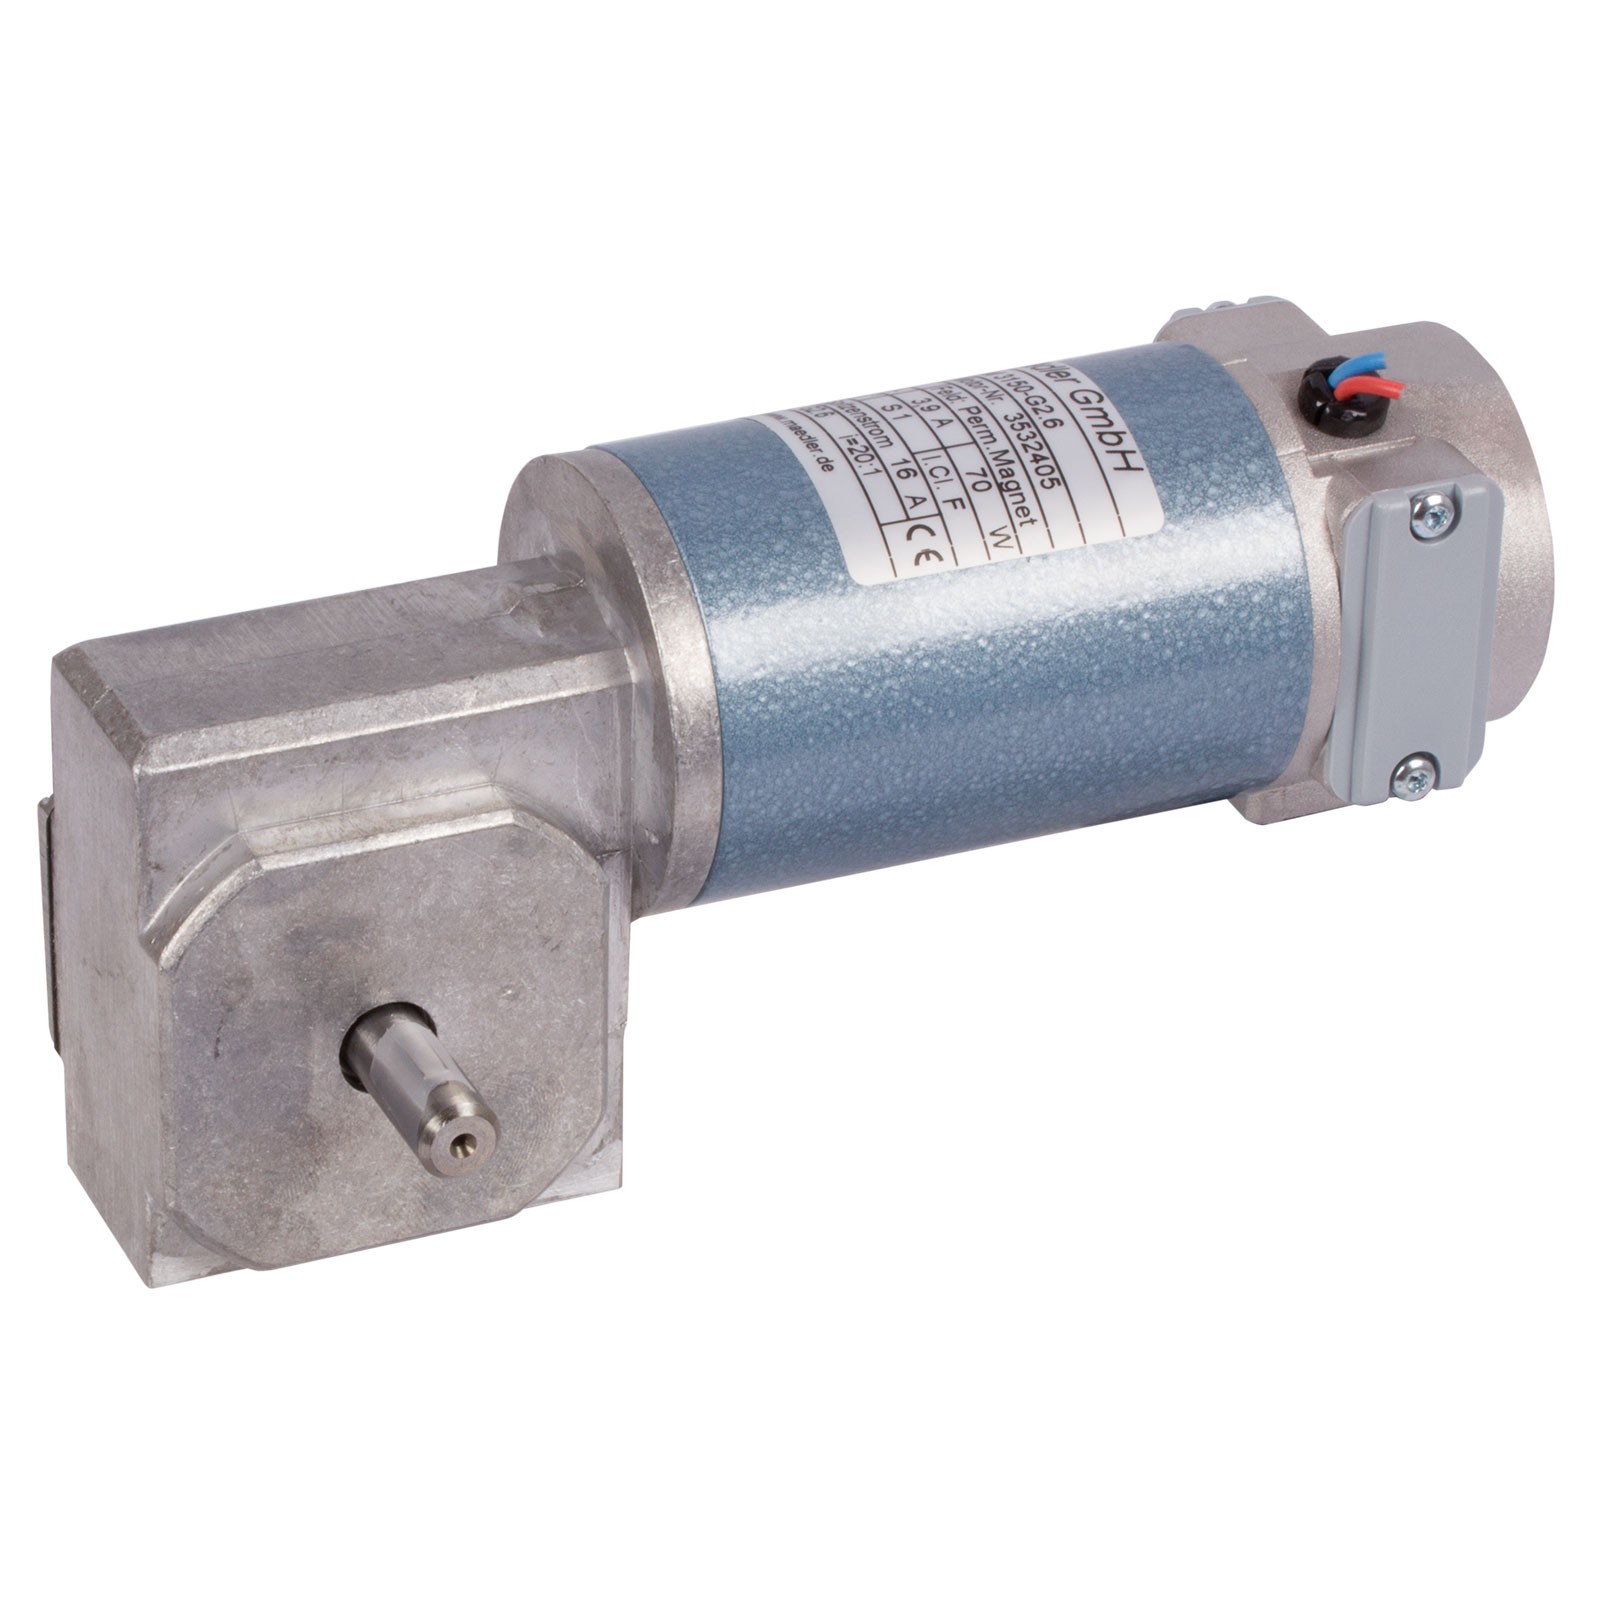 Small geared motor SE with DC motor 24V size 3 n2=276 rpm i=14.5:1 SKU:  43043424 - Maedler North America